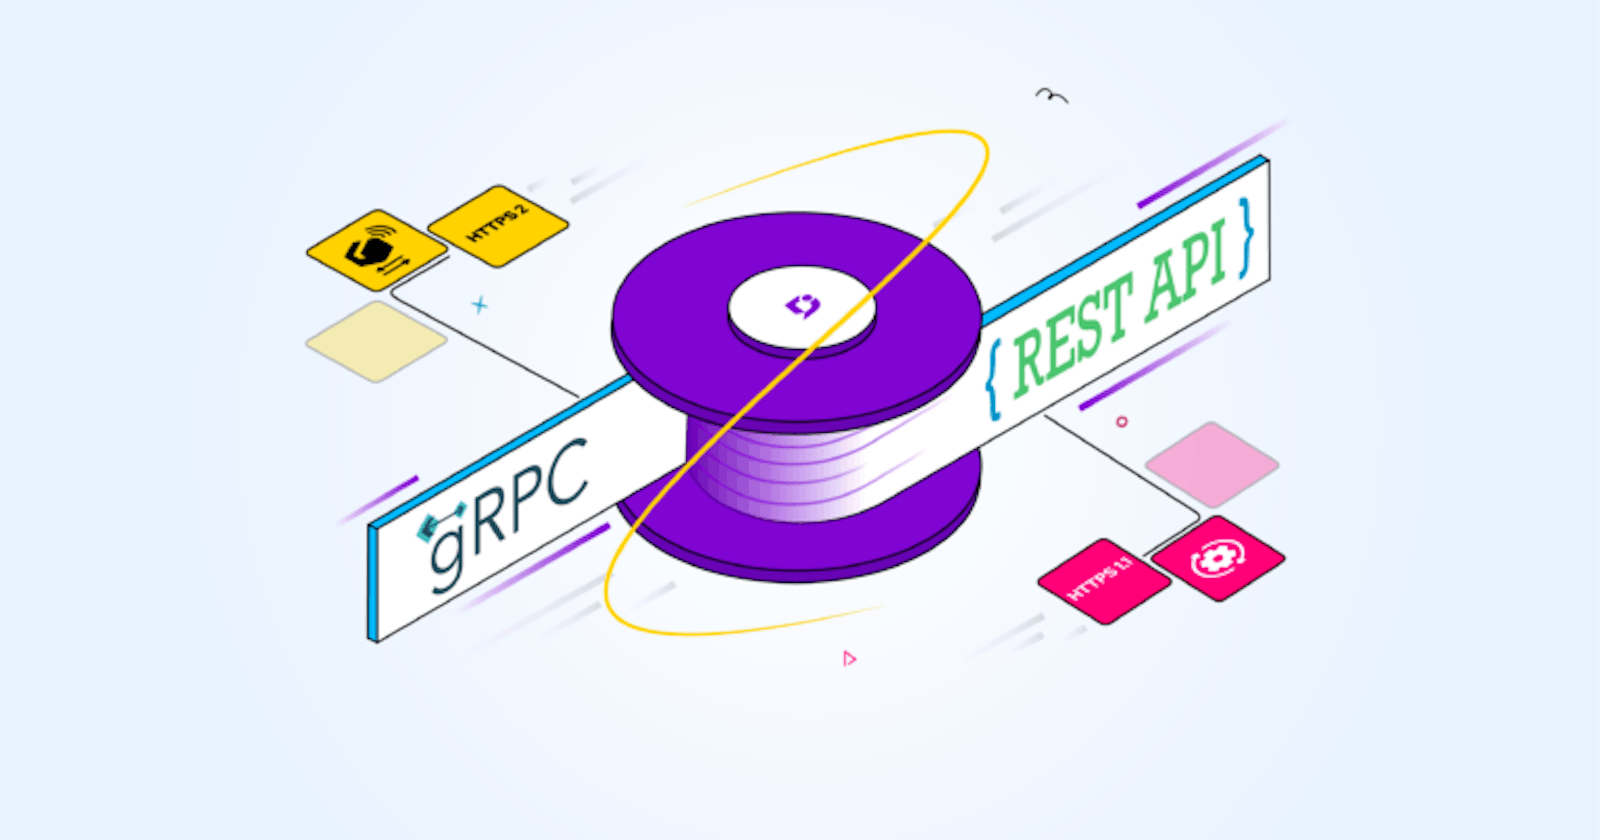 gRPC vs REST: What’s the difference?